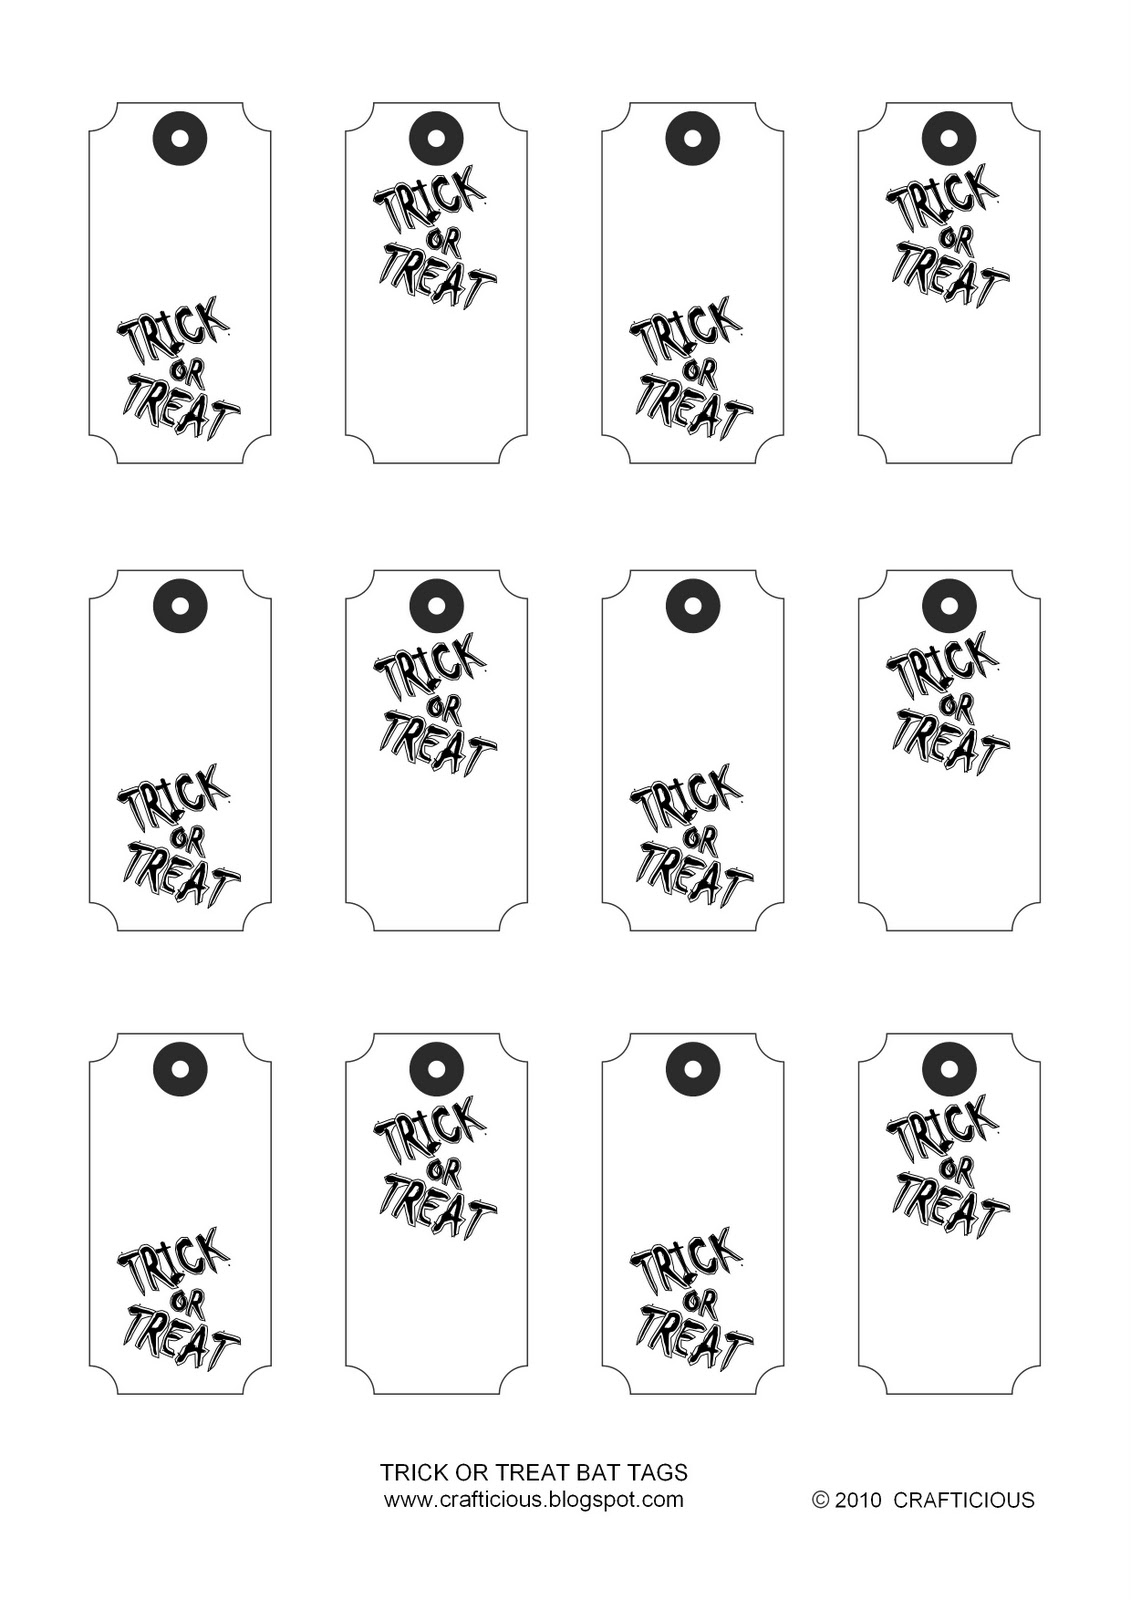 crafticious-halloween-tags-trick-or-treat